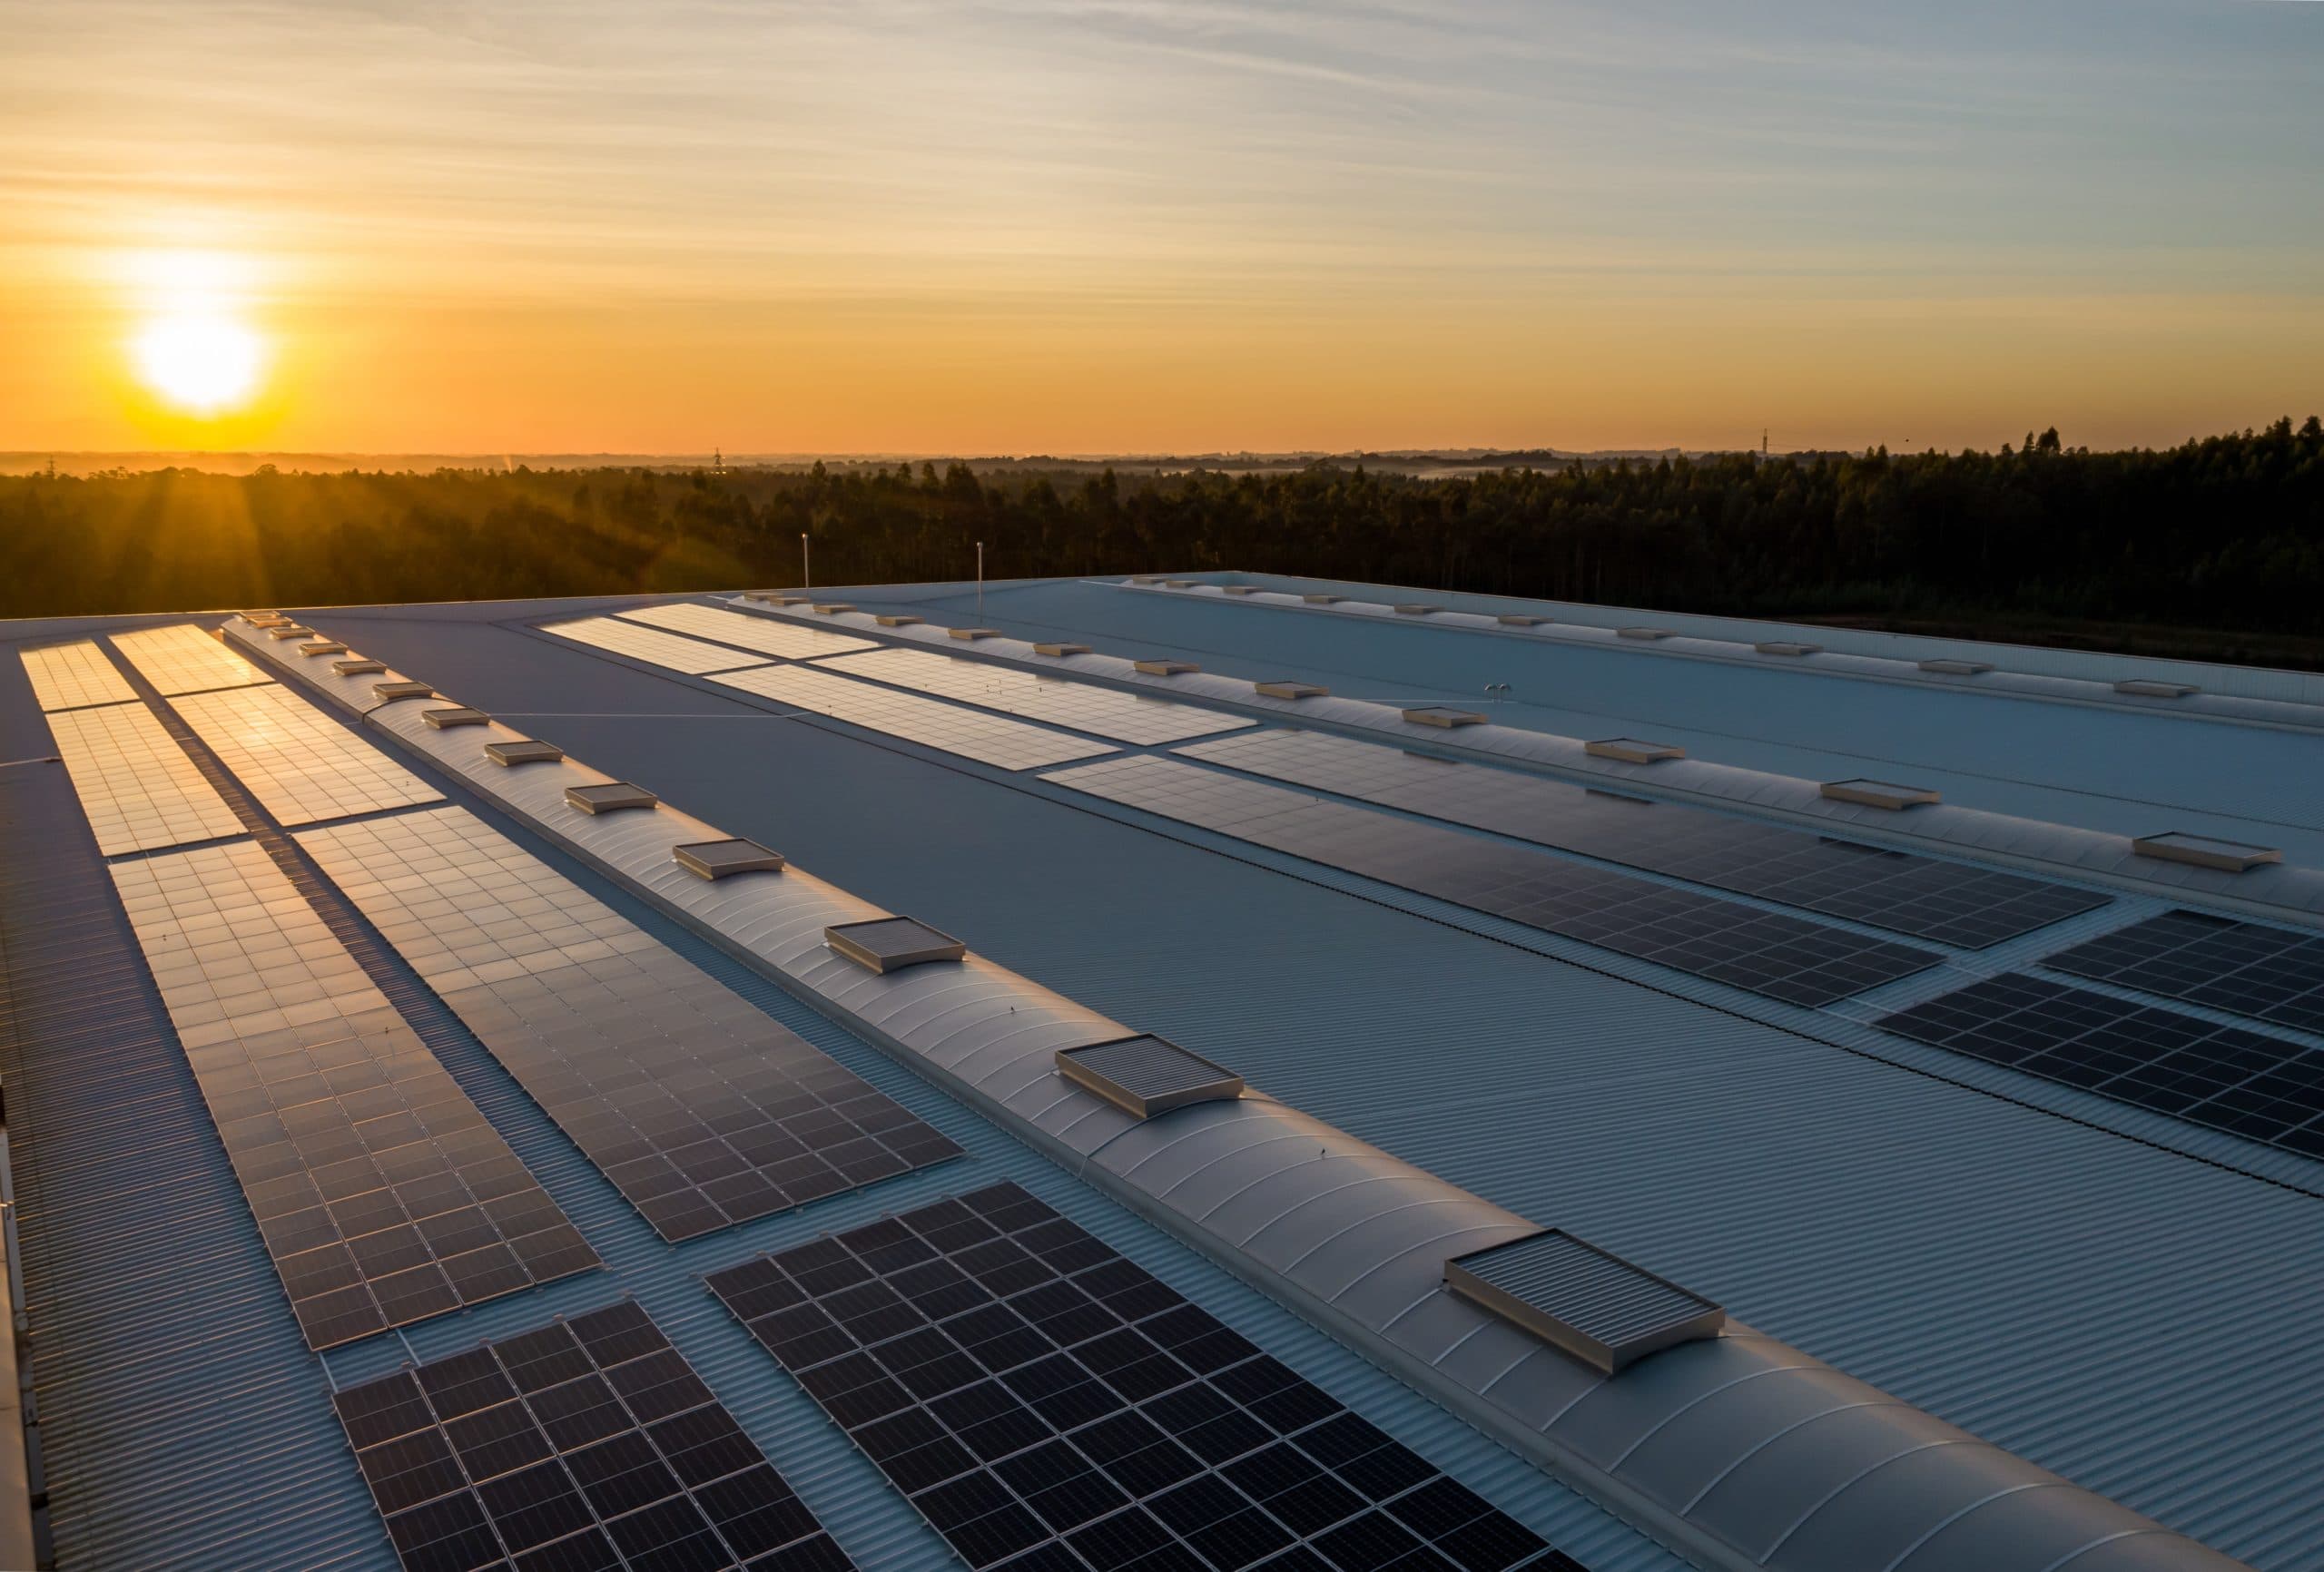 6 Reasons to Be Optimistic About the Solar Industry Feature Image